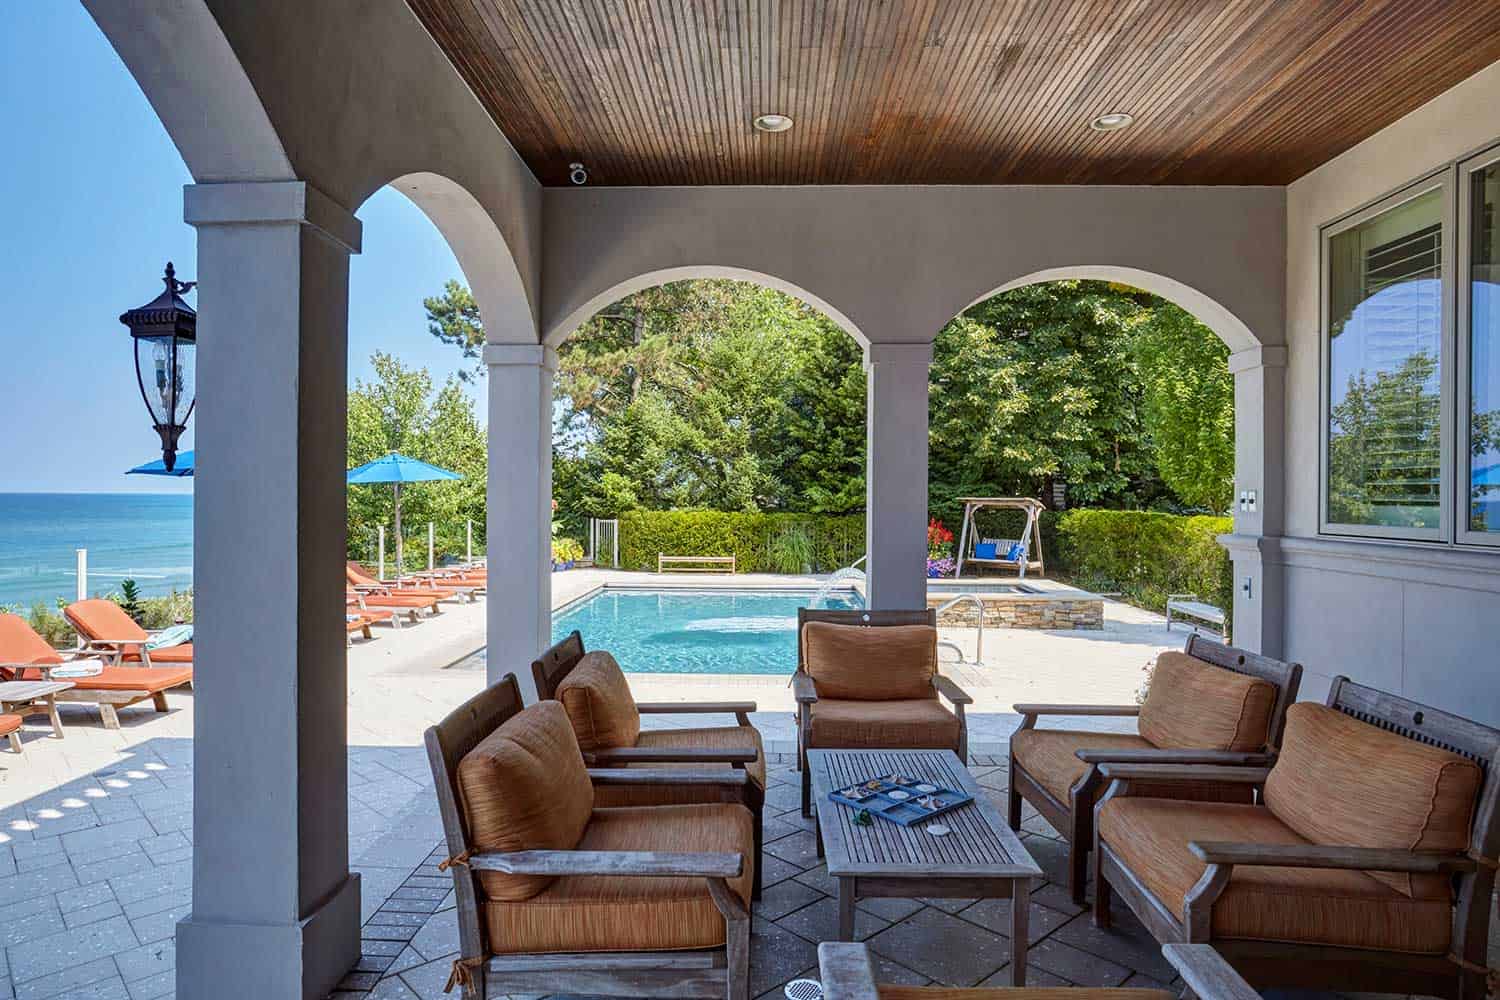 covered-patio-arched-openings-by-pool-harbor-country